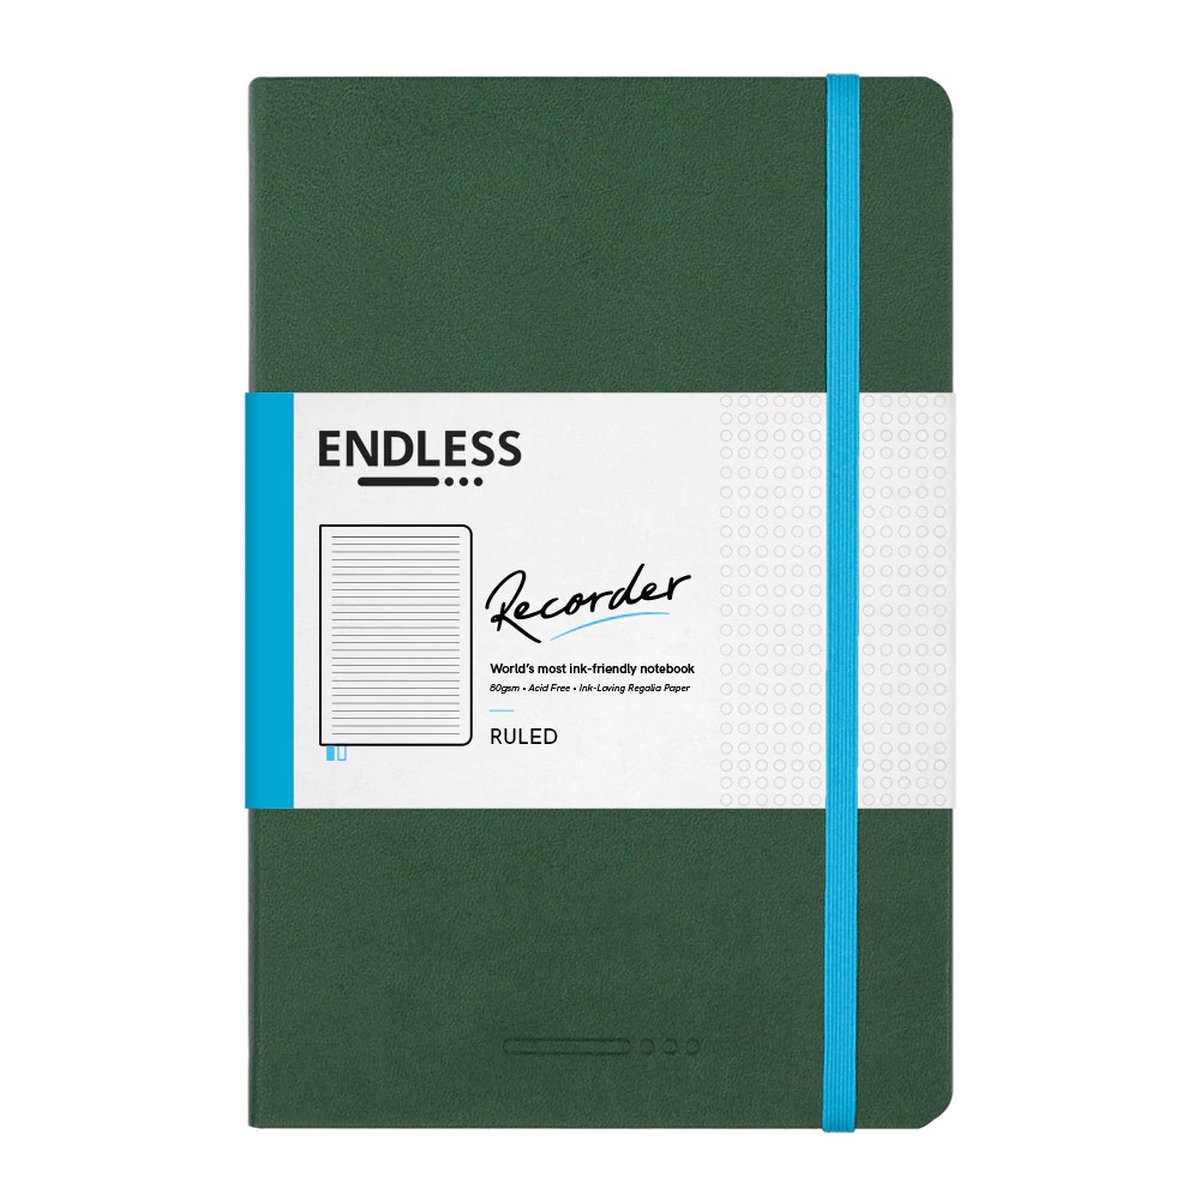 Endless Recorder Notebook Forest Canopy Regalia Paper - Ruled